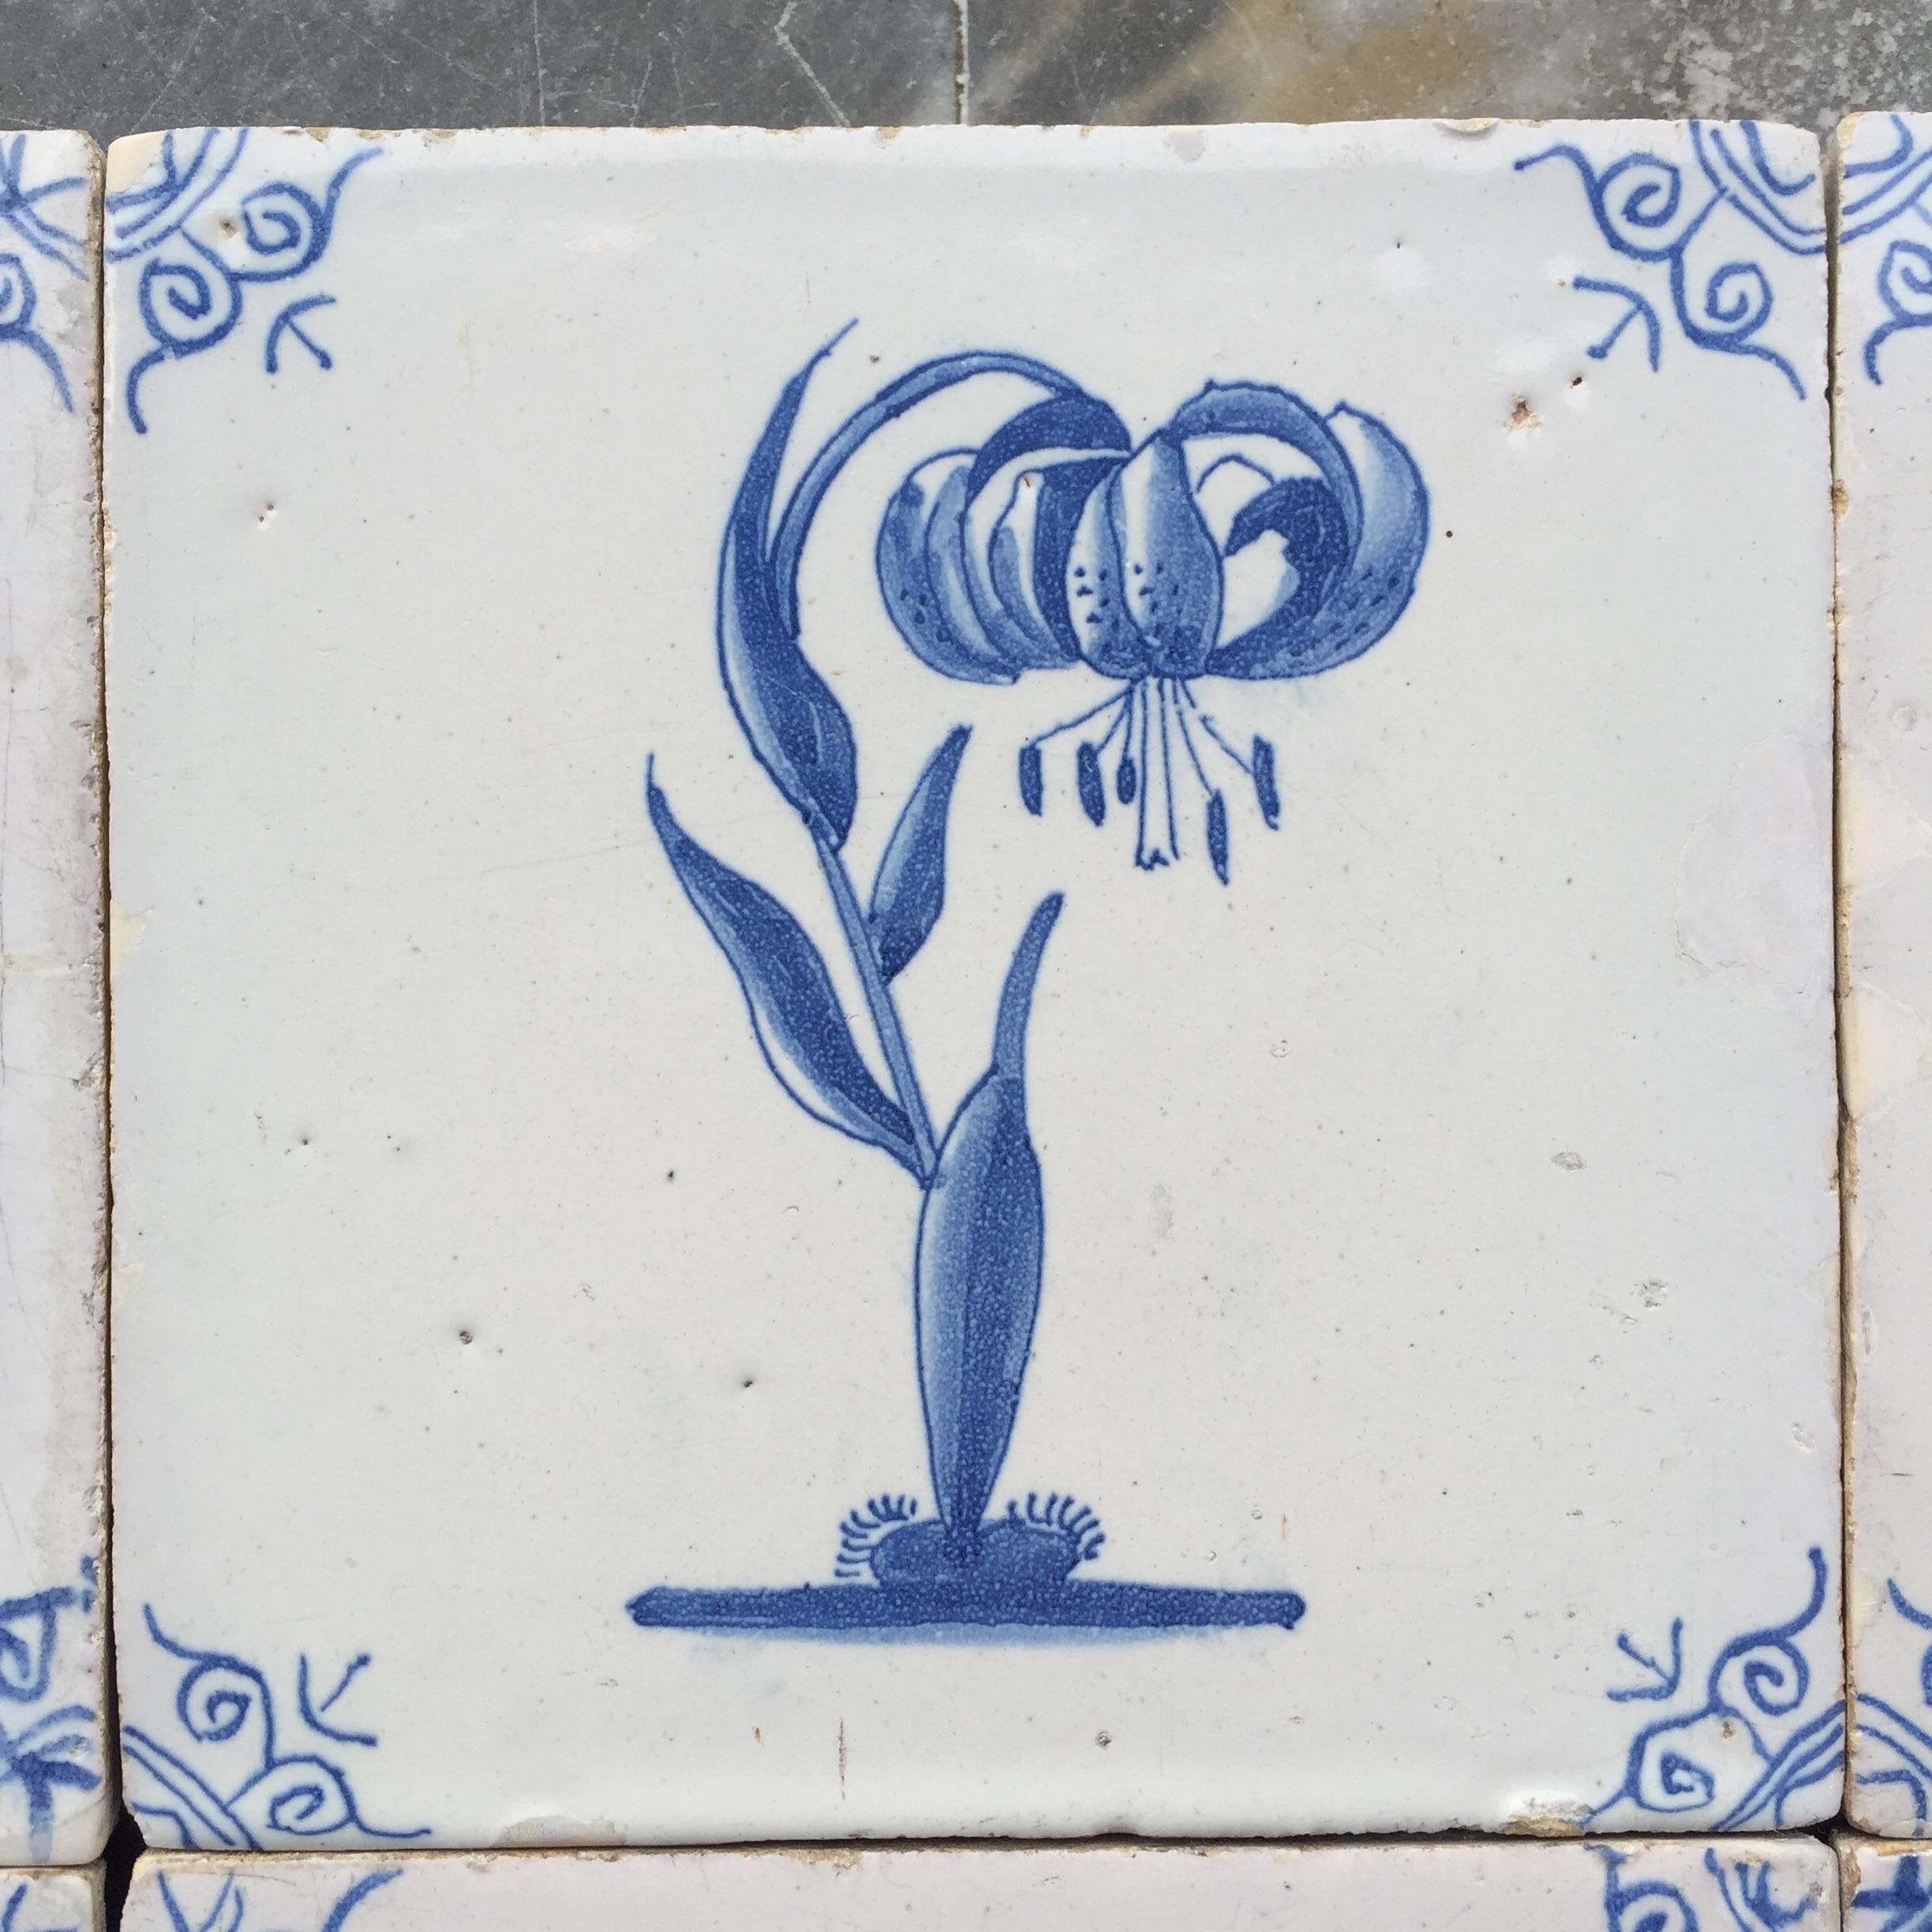 Rare Set of 12 Dutch Delft Tiles with Flowers and Insects, 17th Century 1